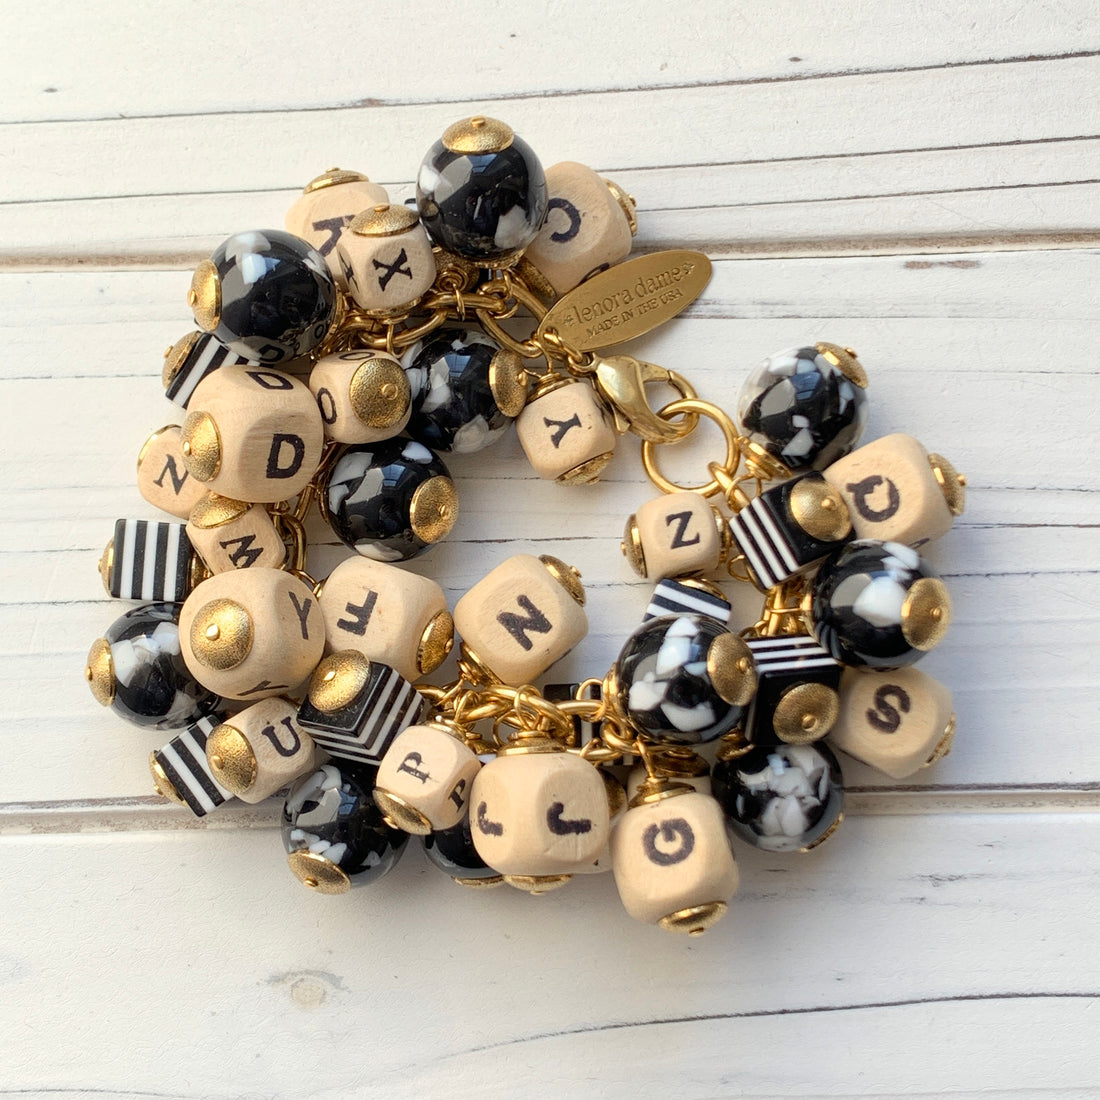 Chunky charm bracelet filled with wooden letter beads, striped square beads and round black and white beads hung on a gold cable chain with lobster clasp and Lenora Dame hang tag. 